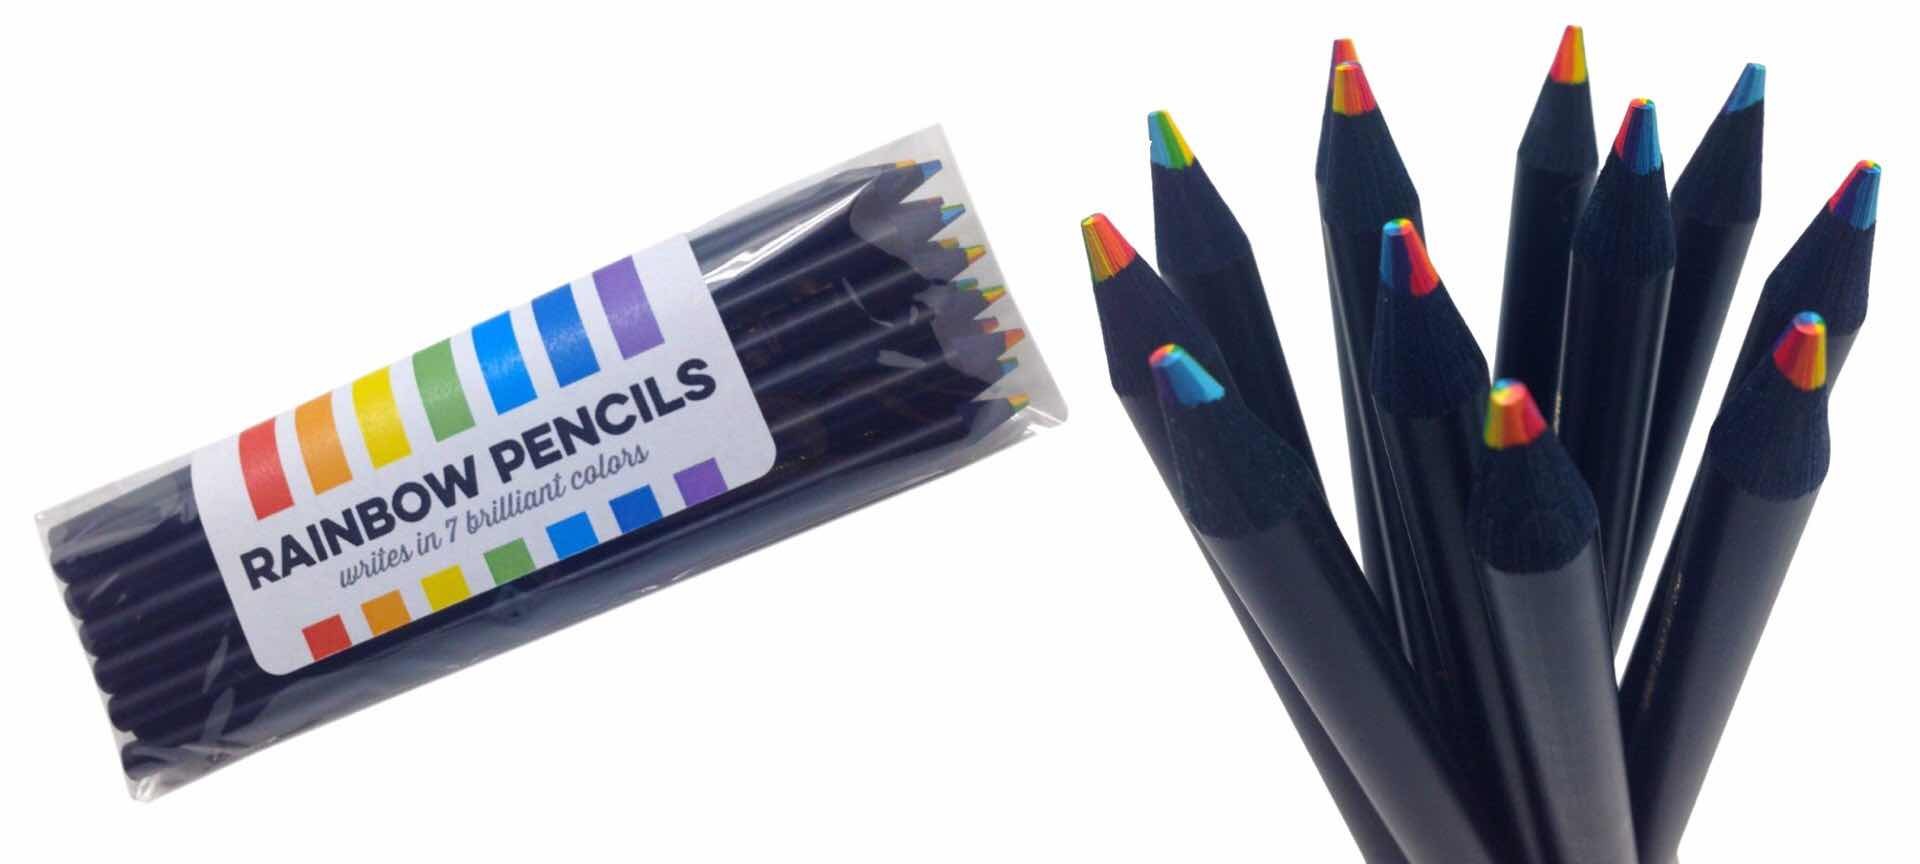 Stubby Pencil Studio's black wood rainbow pencils. ($15 for 6-pack, $28 for 12-pack)